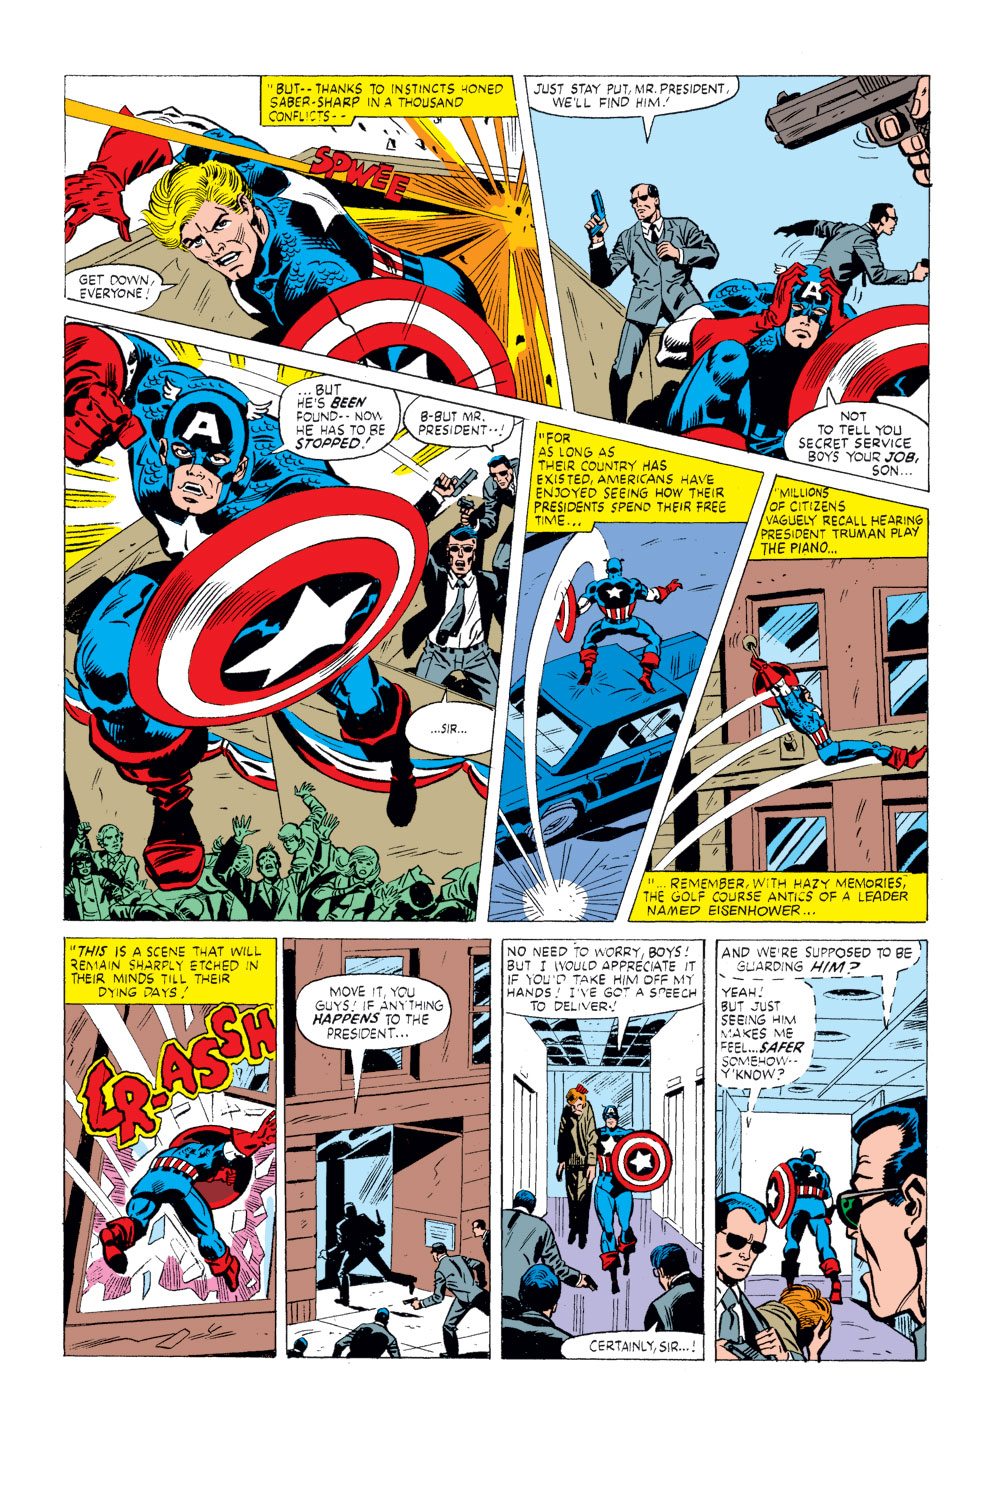 What If? (1977) issue 26 - Captain America had been elected president - Page 11